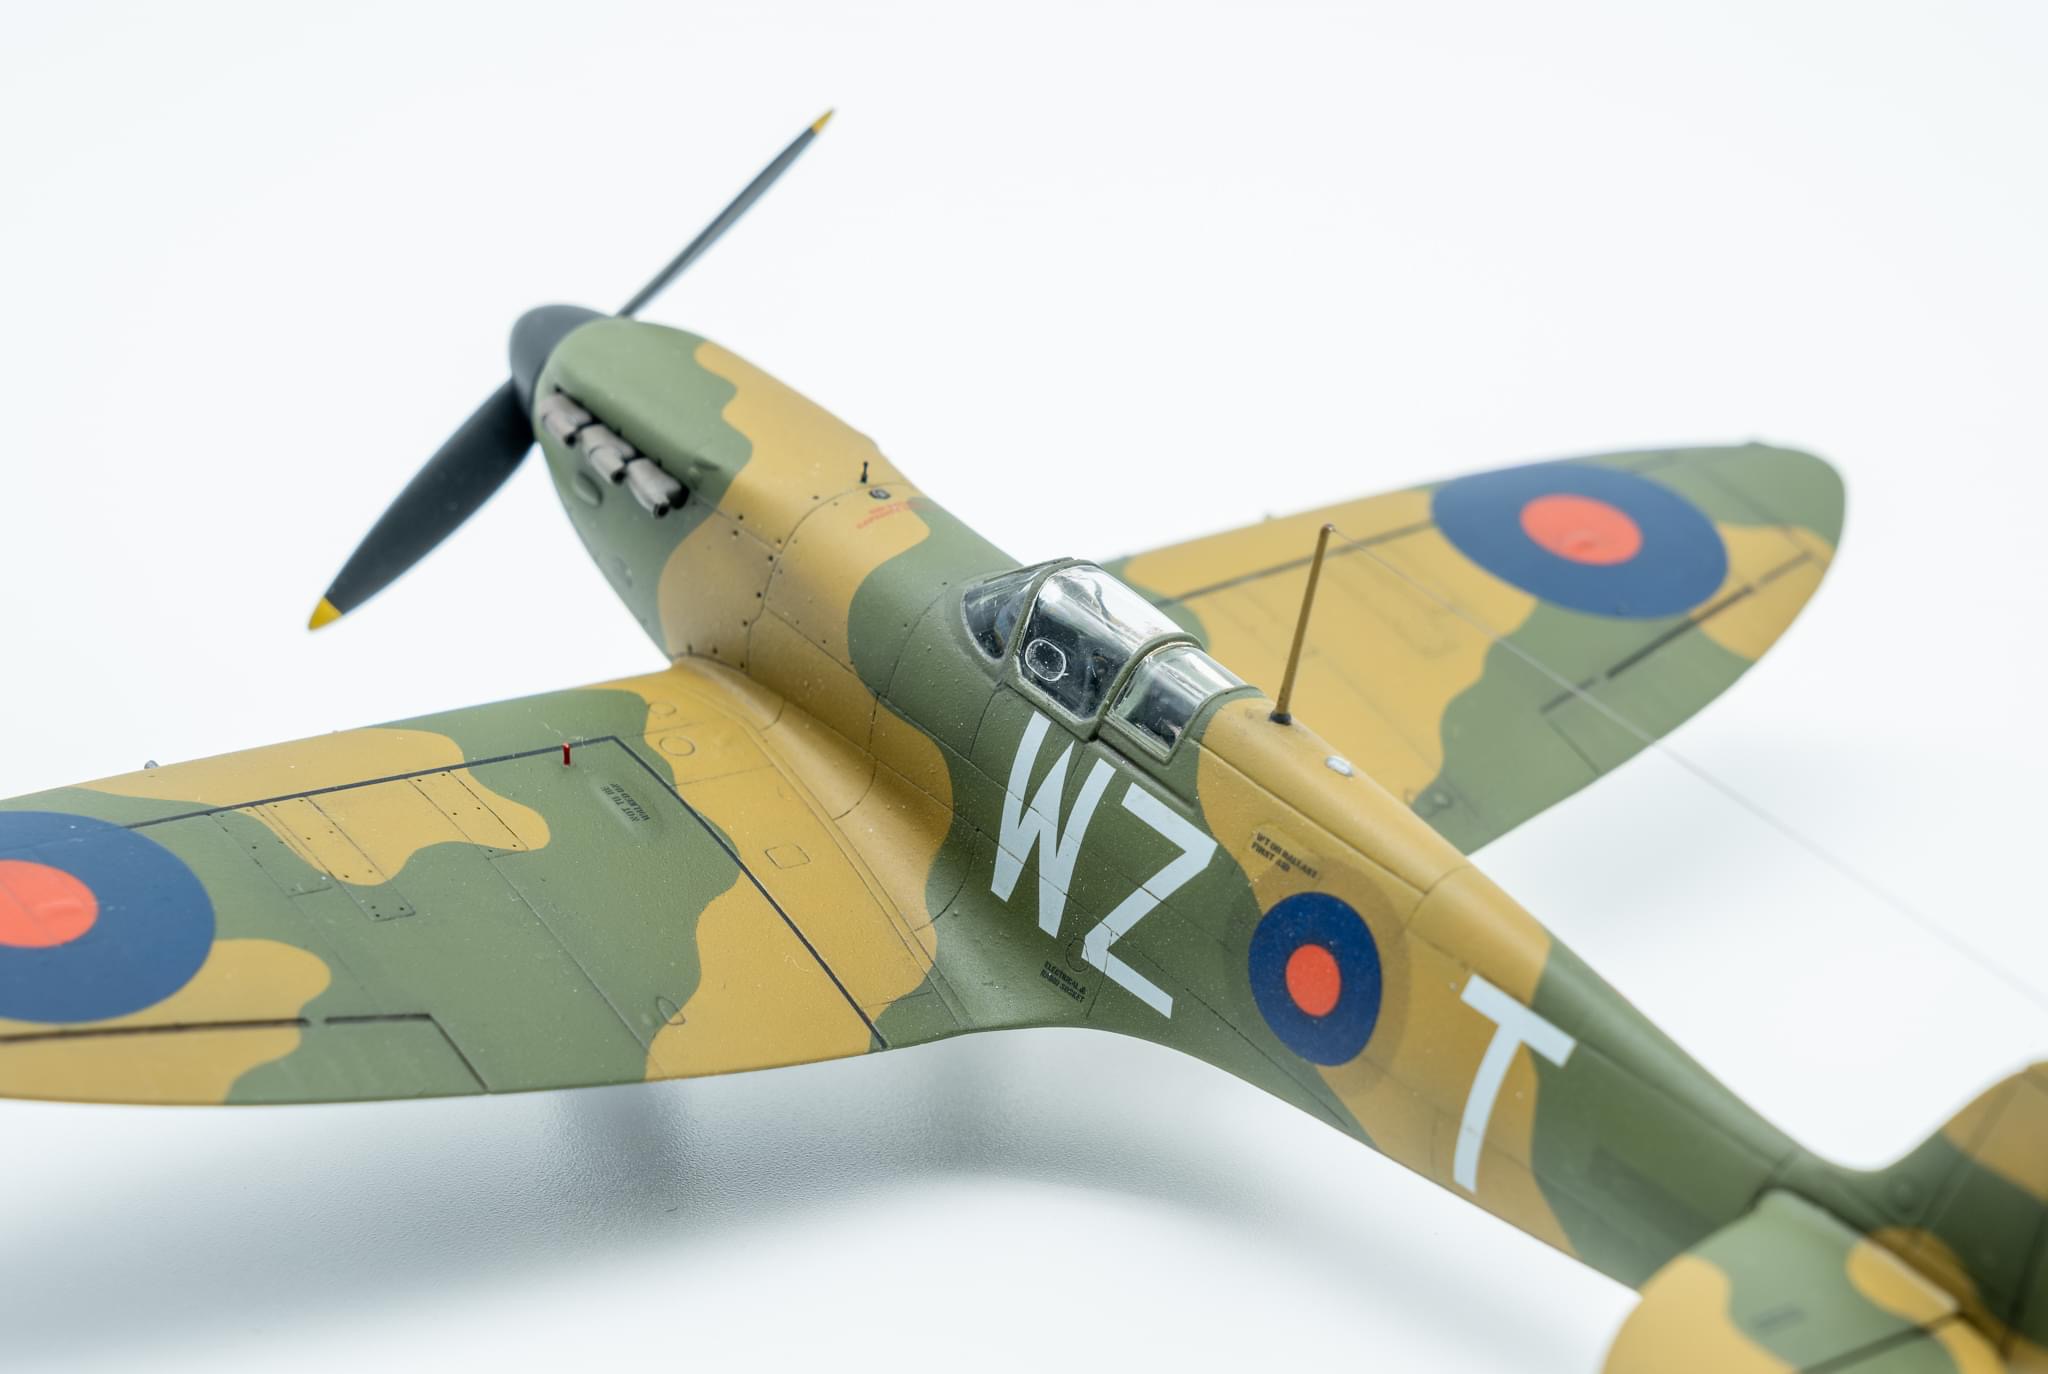 Pistonheads - The image showcases a vintage military plane, painted in an olive green color. It's a small model aircraft that carries the markings of the British army. The plane is adorned with the letters 'R' and 'F', along with a number on its side. A single propeller can be seen on the nose of the plane. This aircraft is a part of a collection, as indicated by a small display stand beneath it.